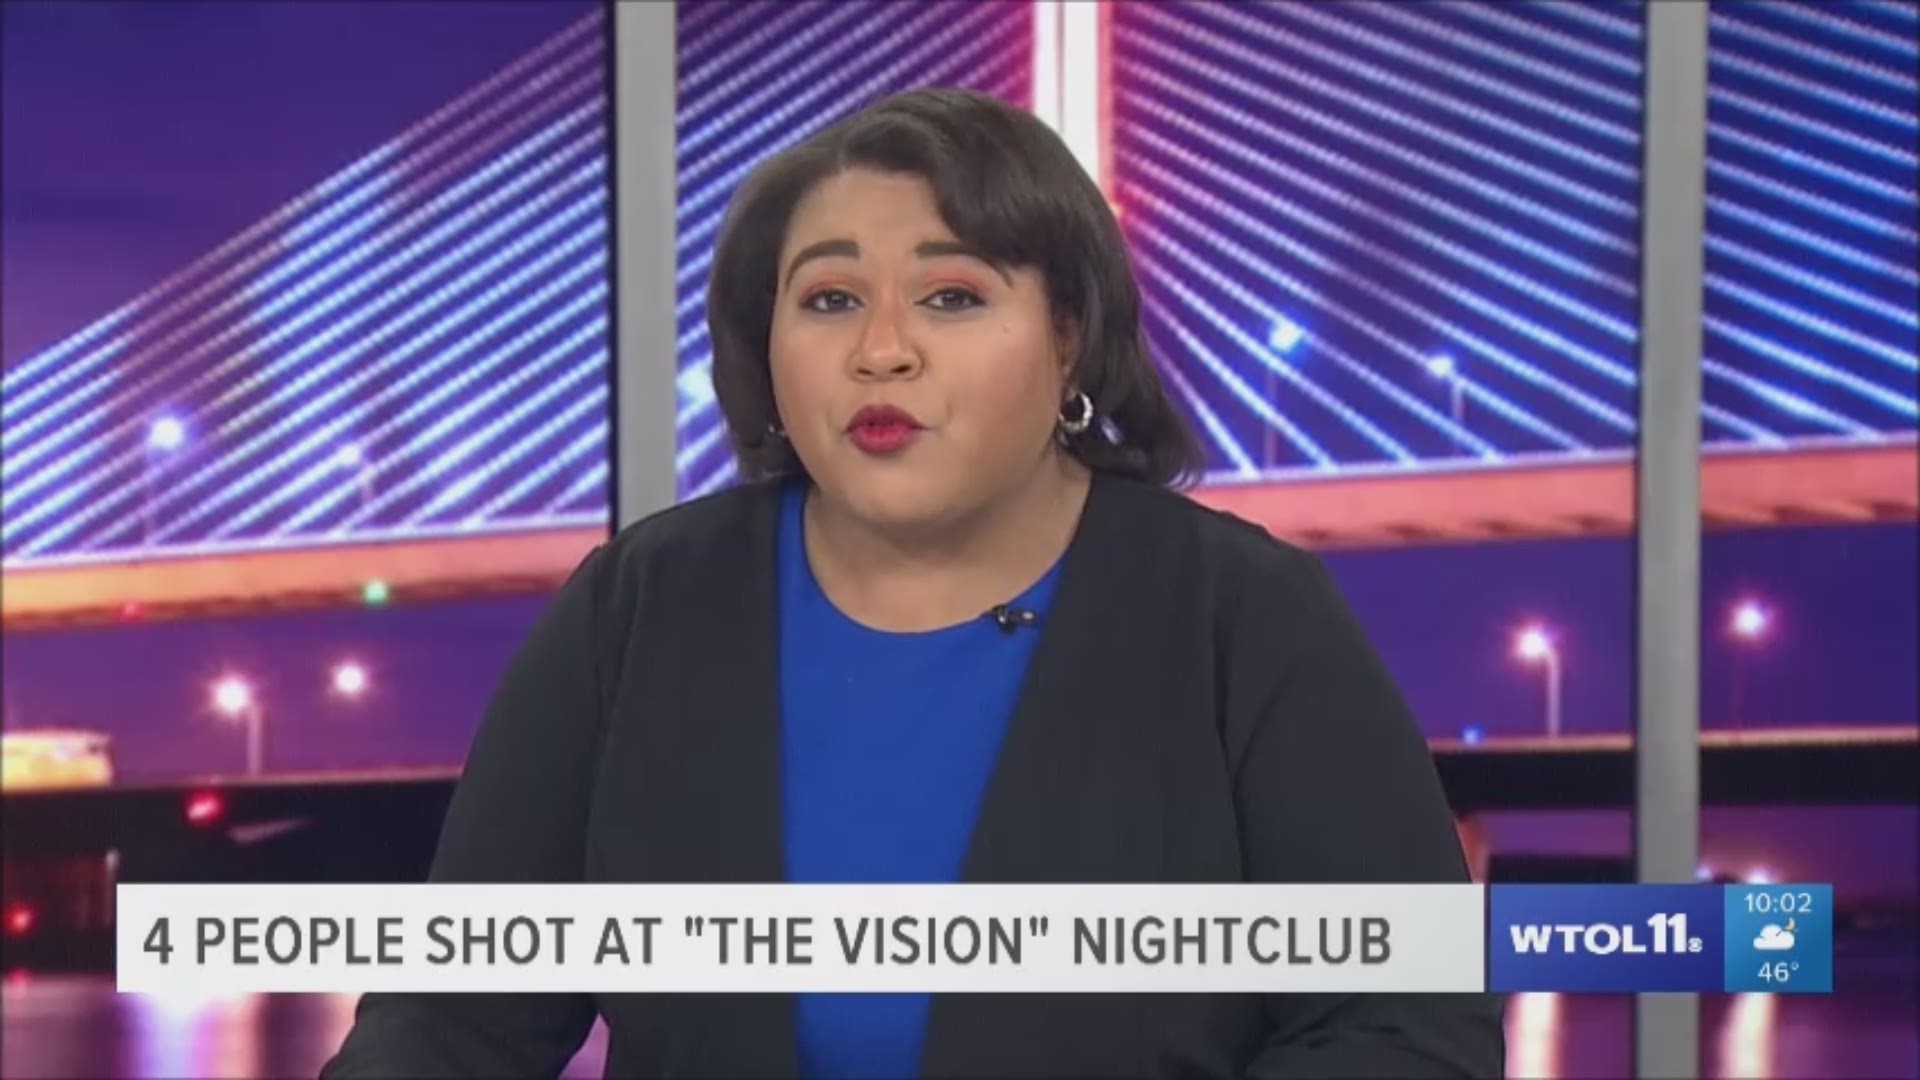 This happened just before 3 a.m. at a club called 'The Vision.' At least four people were shot and treated at local hospitals.